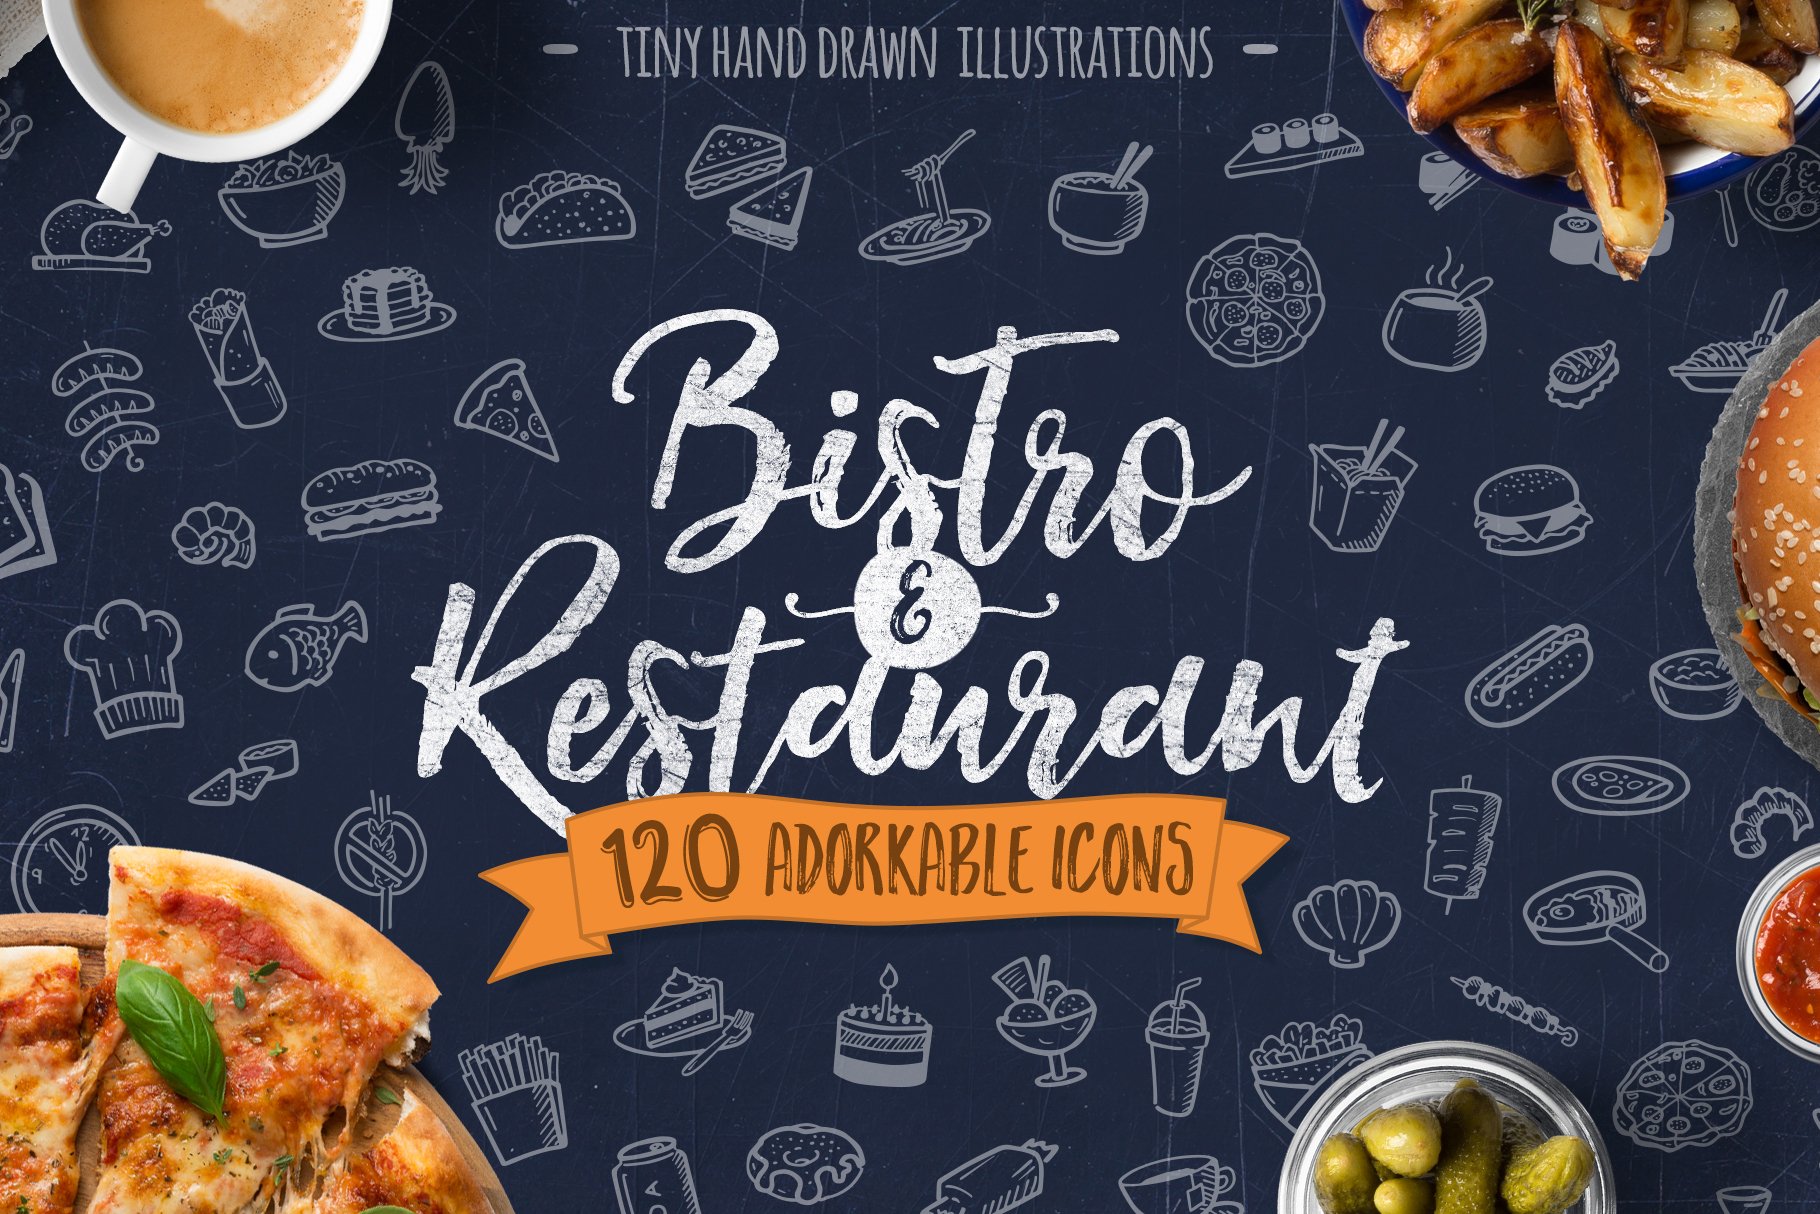 Bistro & Restaurant Hand Drawn Icons cover image.